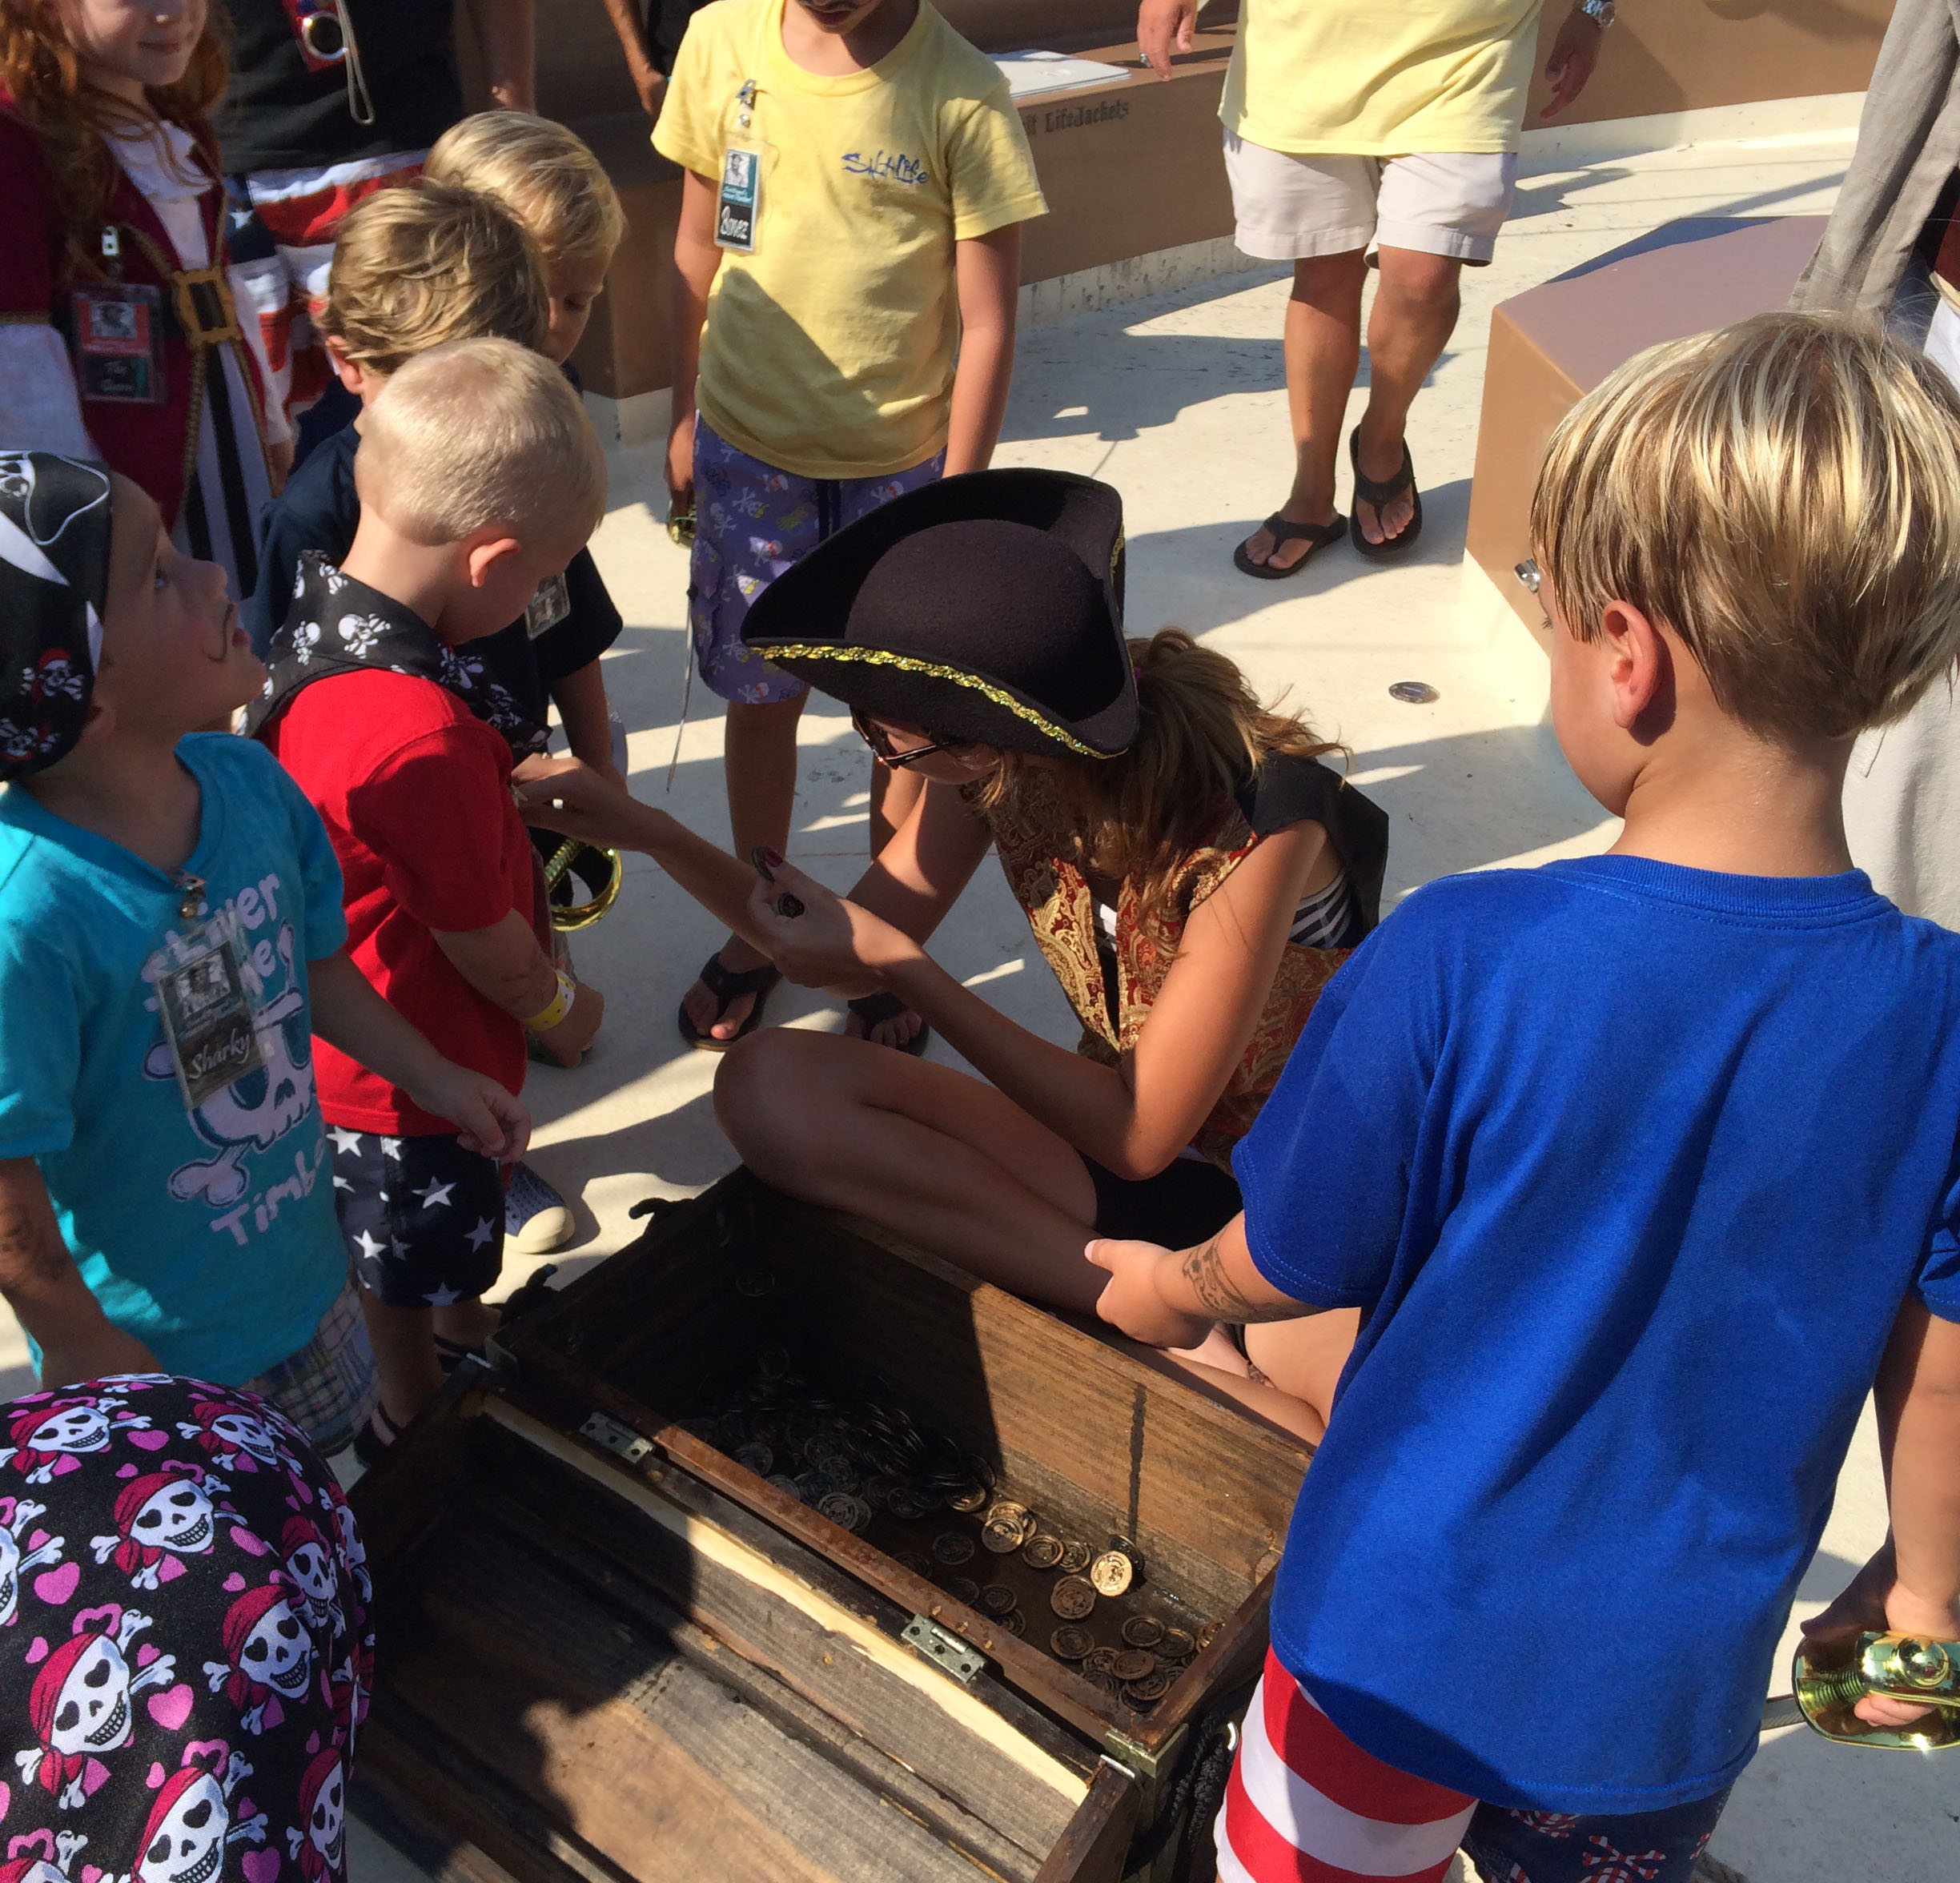 The treasure chest was open and each kid received some of its contents.